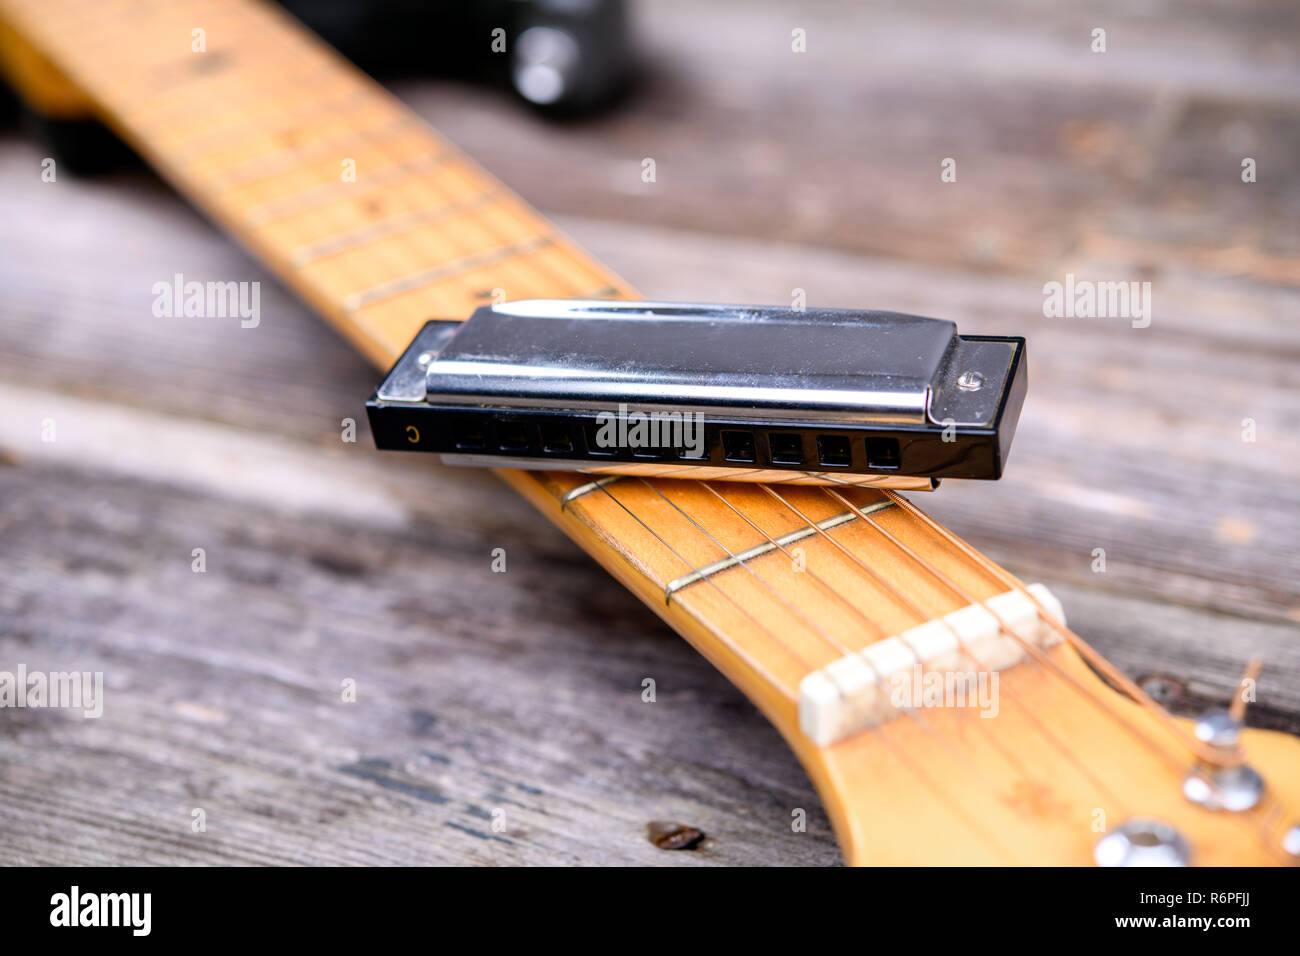 guitar with blues harmonica on wooden ground Stock Photo - Alamy